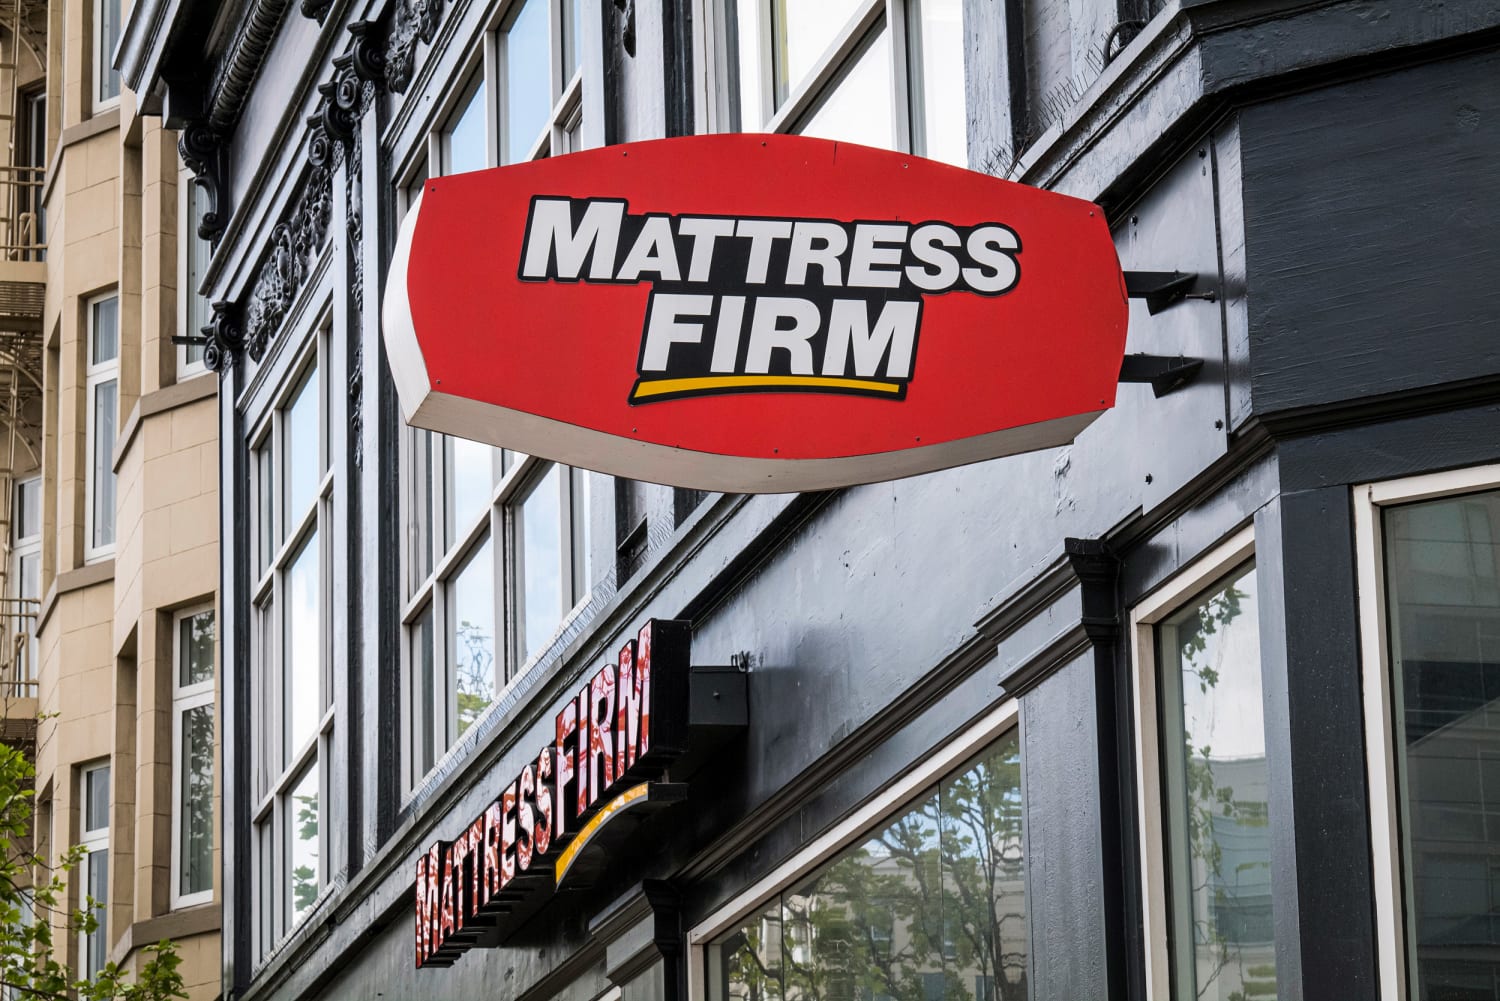 Tempur Sealy is buying Mattress Firm for $4 billion